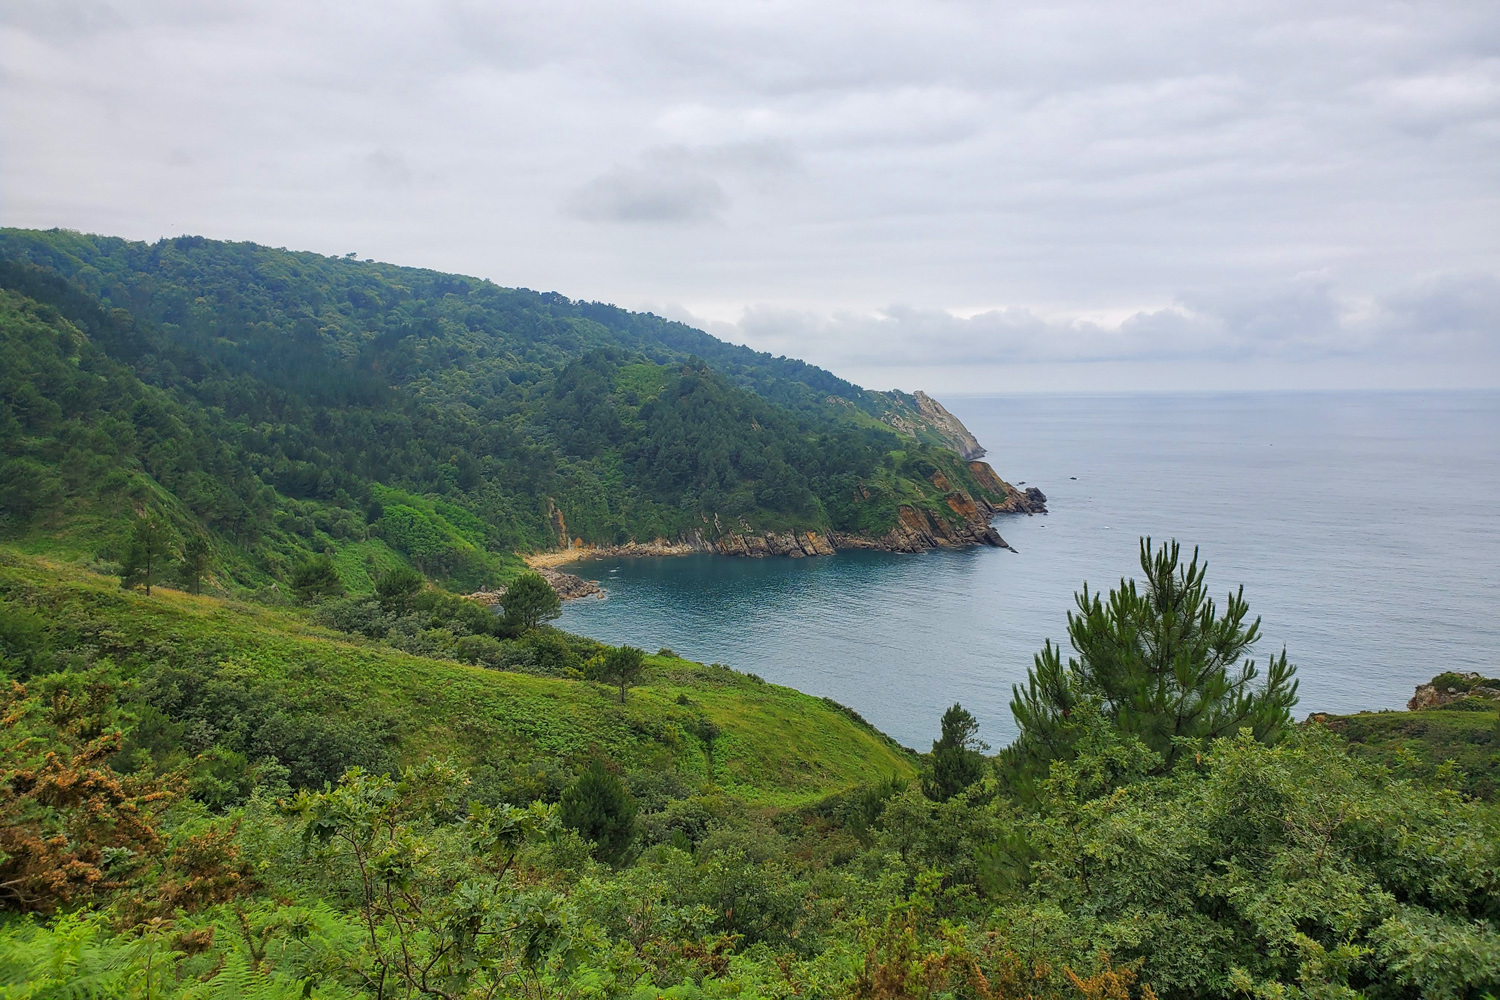 View of coastline in northern Spain from the Camino de Santiago trail